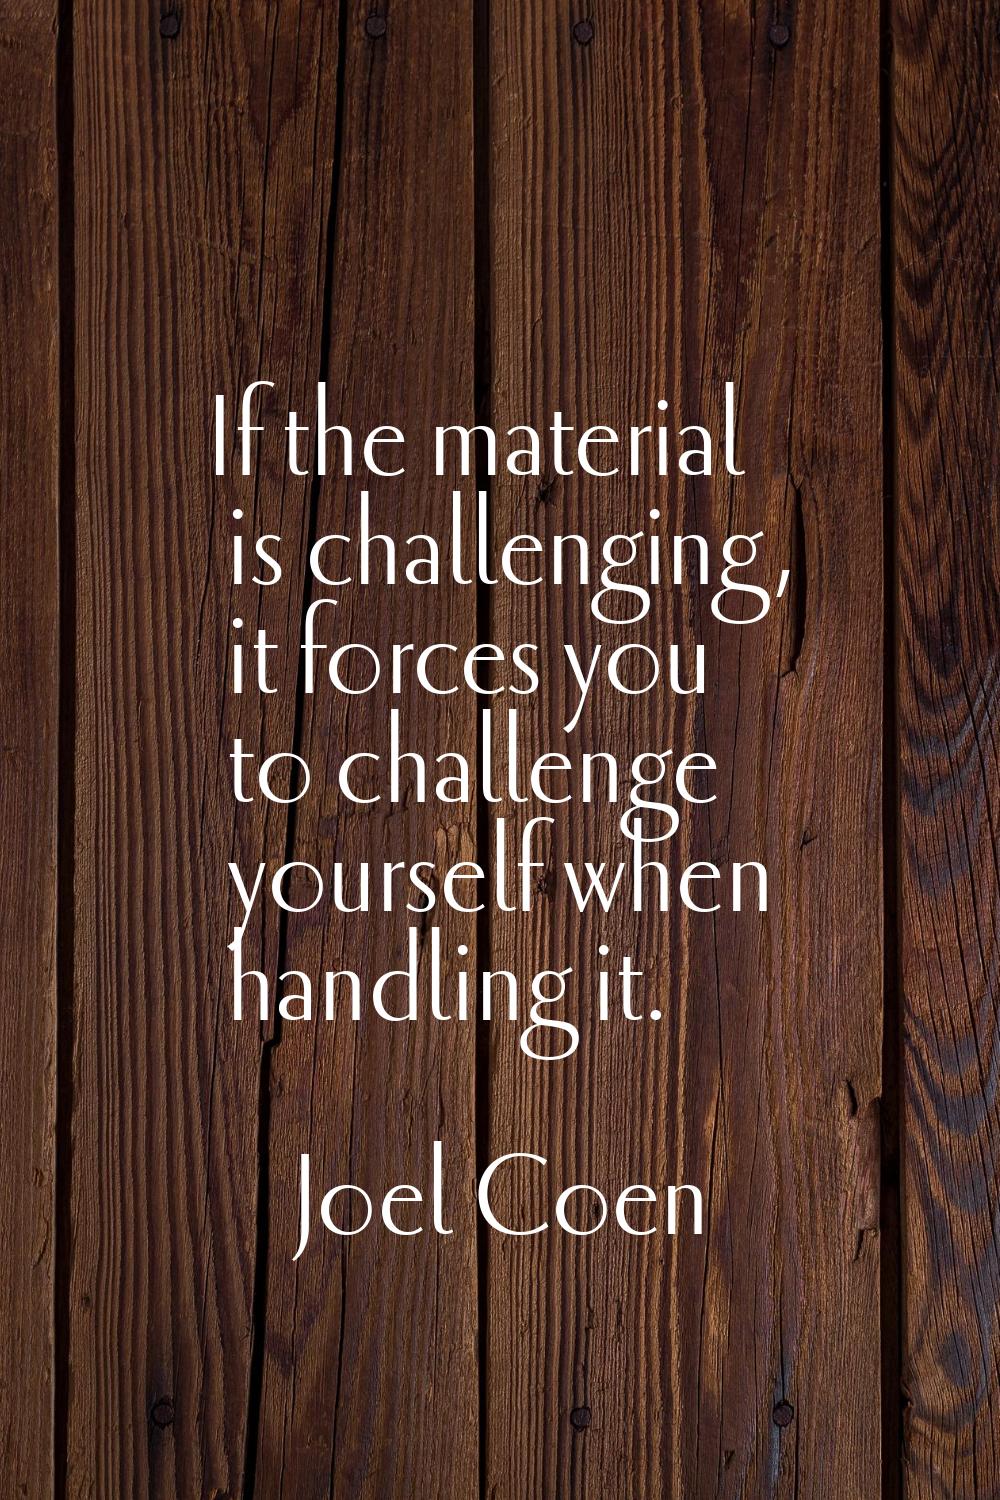 If the material is challenging, it forces you to challenge yourself when handling it.